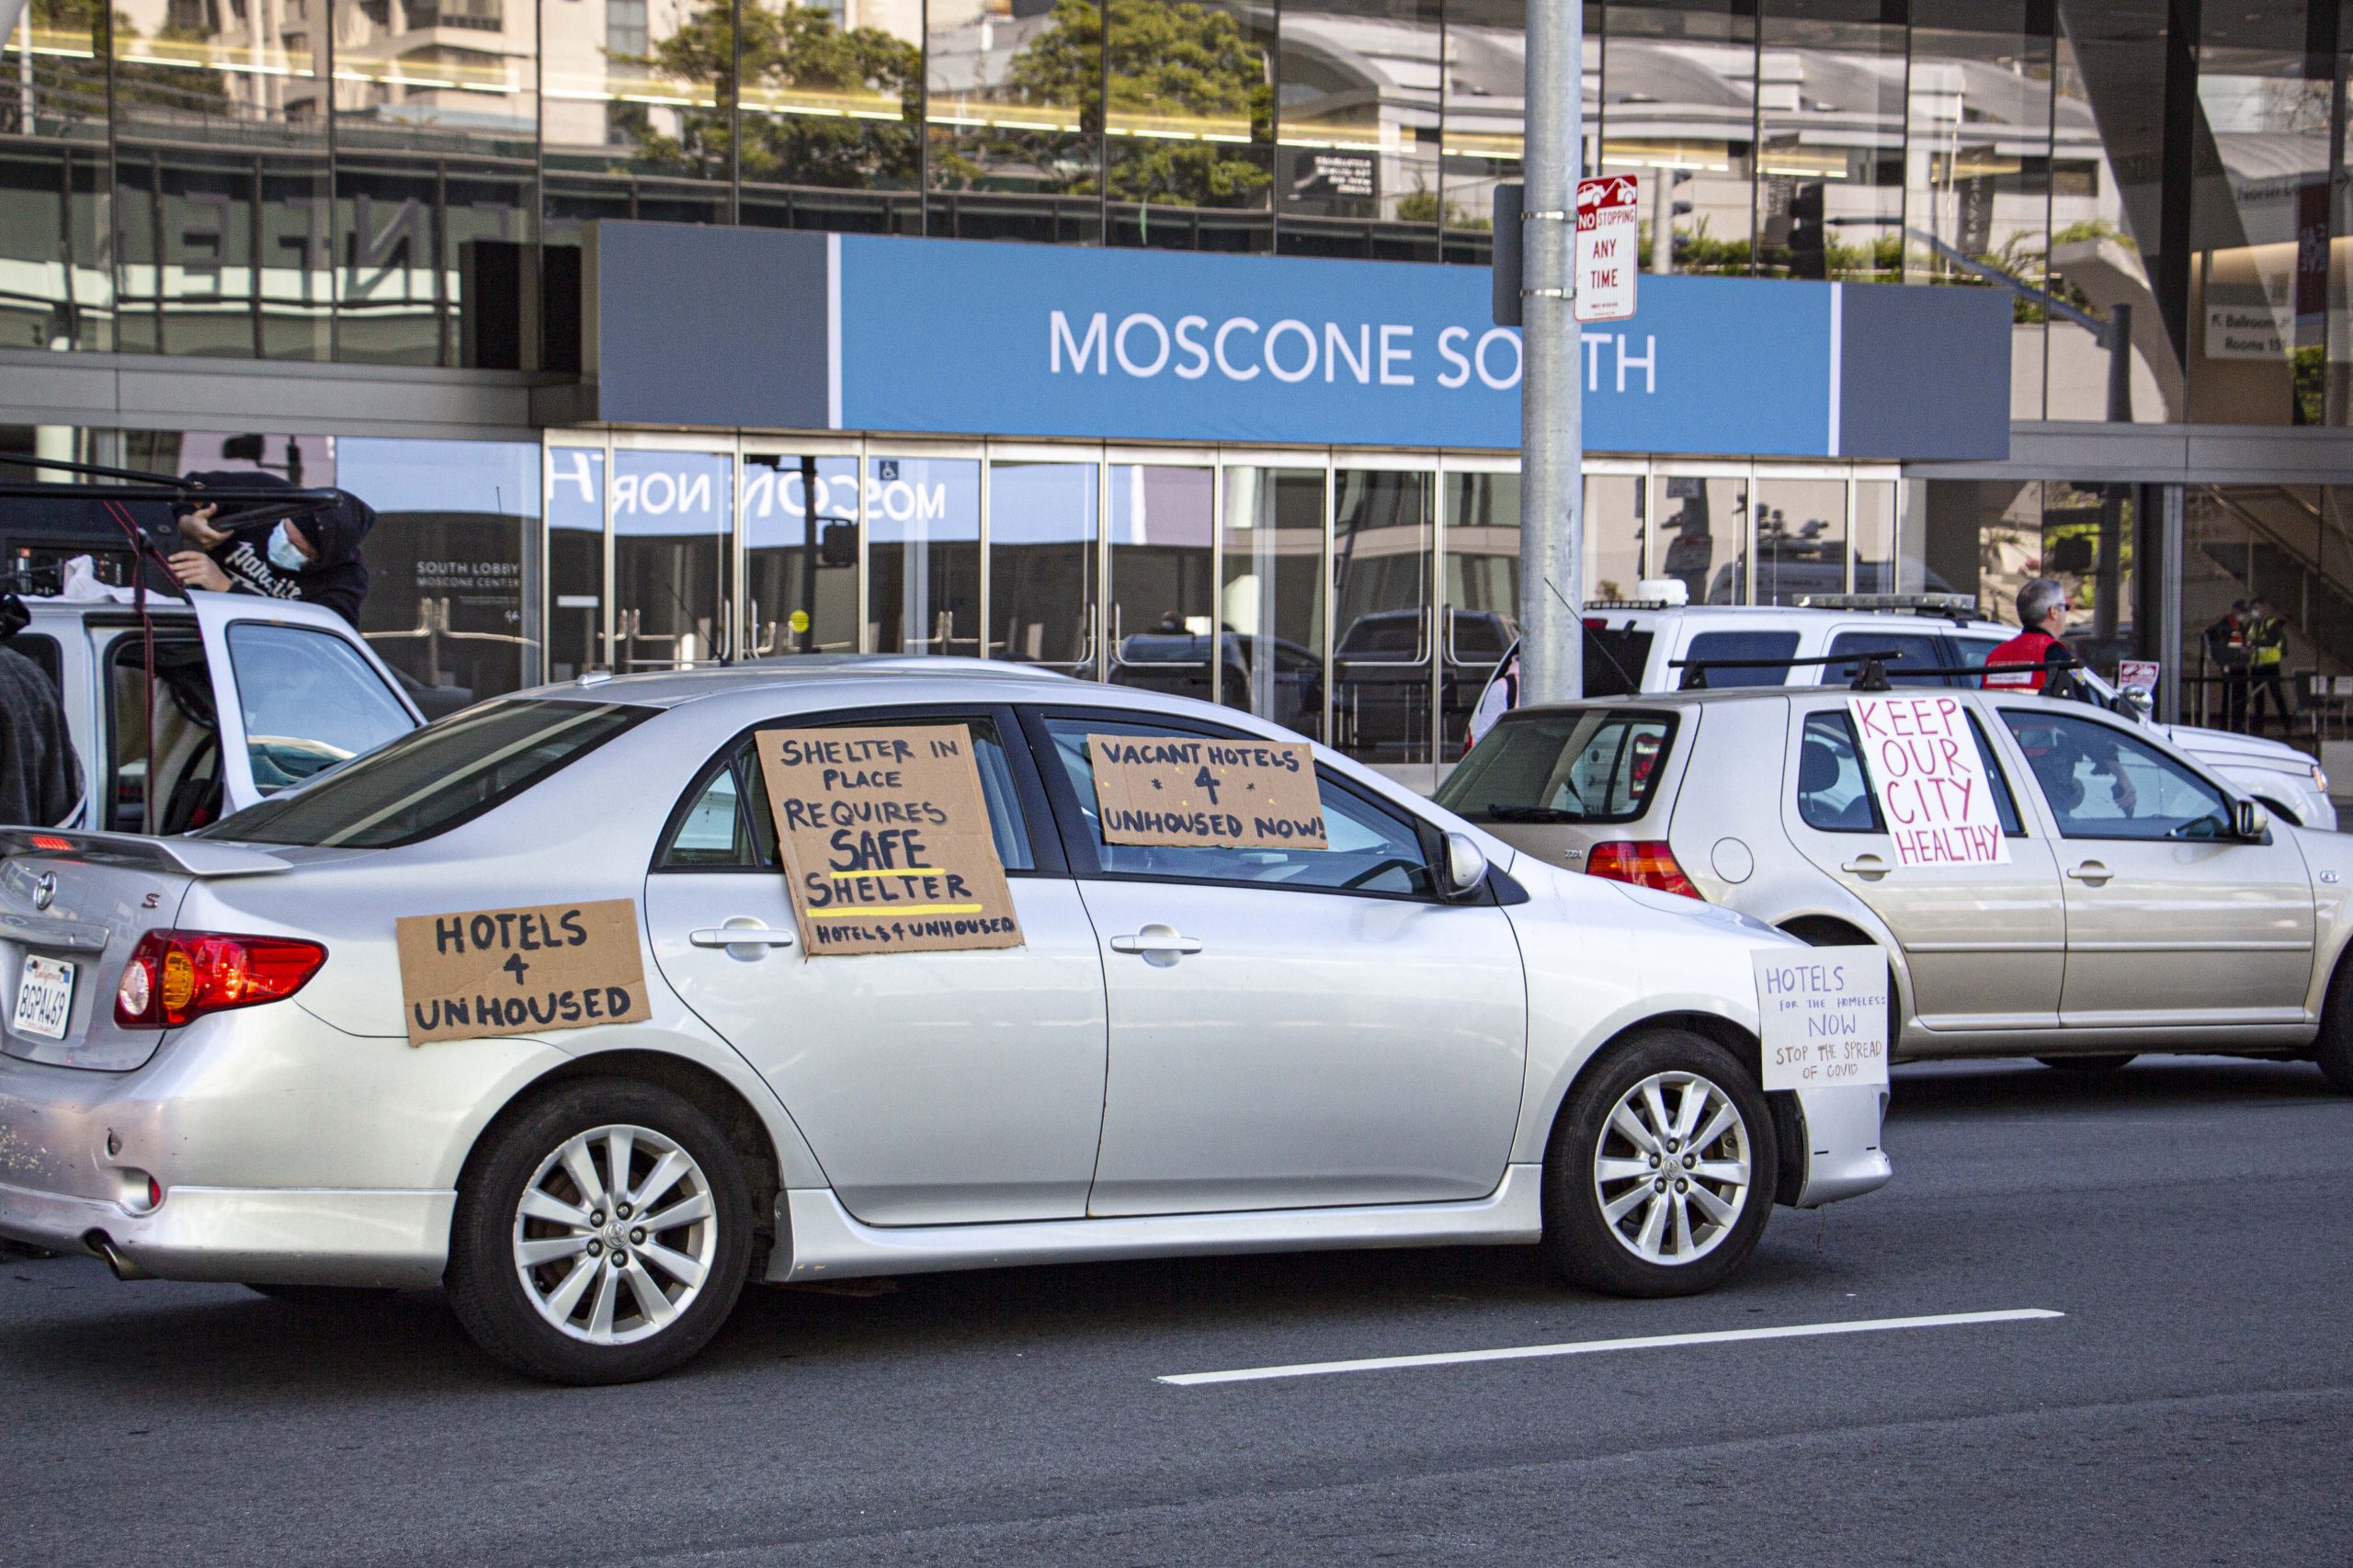 car_in_front_of_moscone_sign.jpg